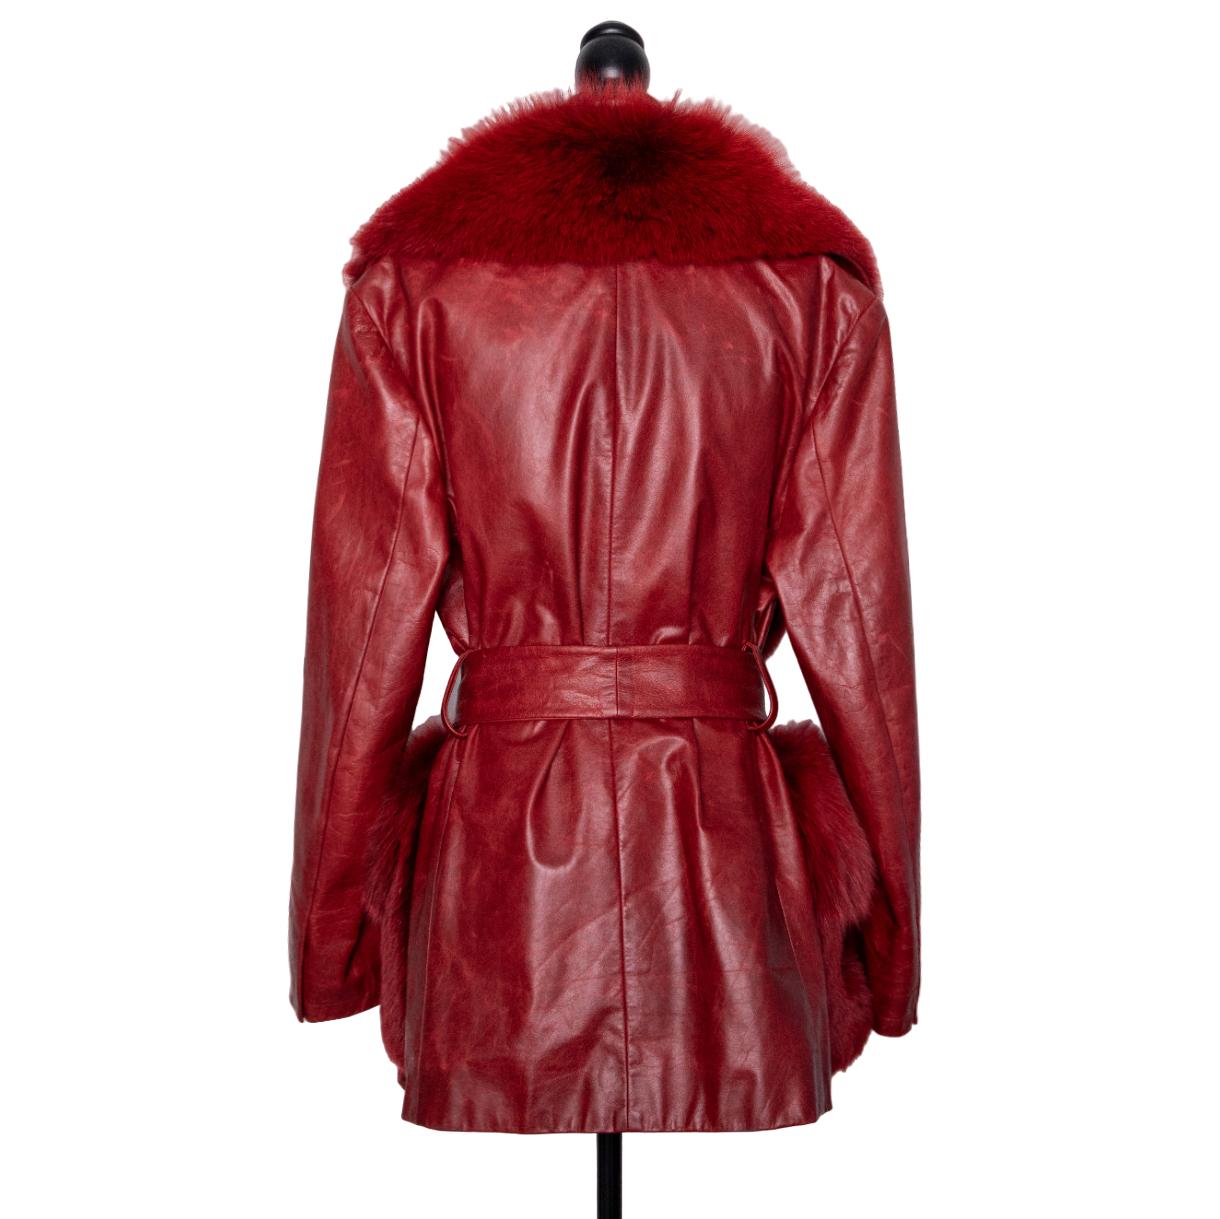 John Galliano Vintage Red Belted Leather Jacket with Fox Fur Collar - Size F42 In Excellent Condition For Sale In Frankfurt am Main, DE